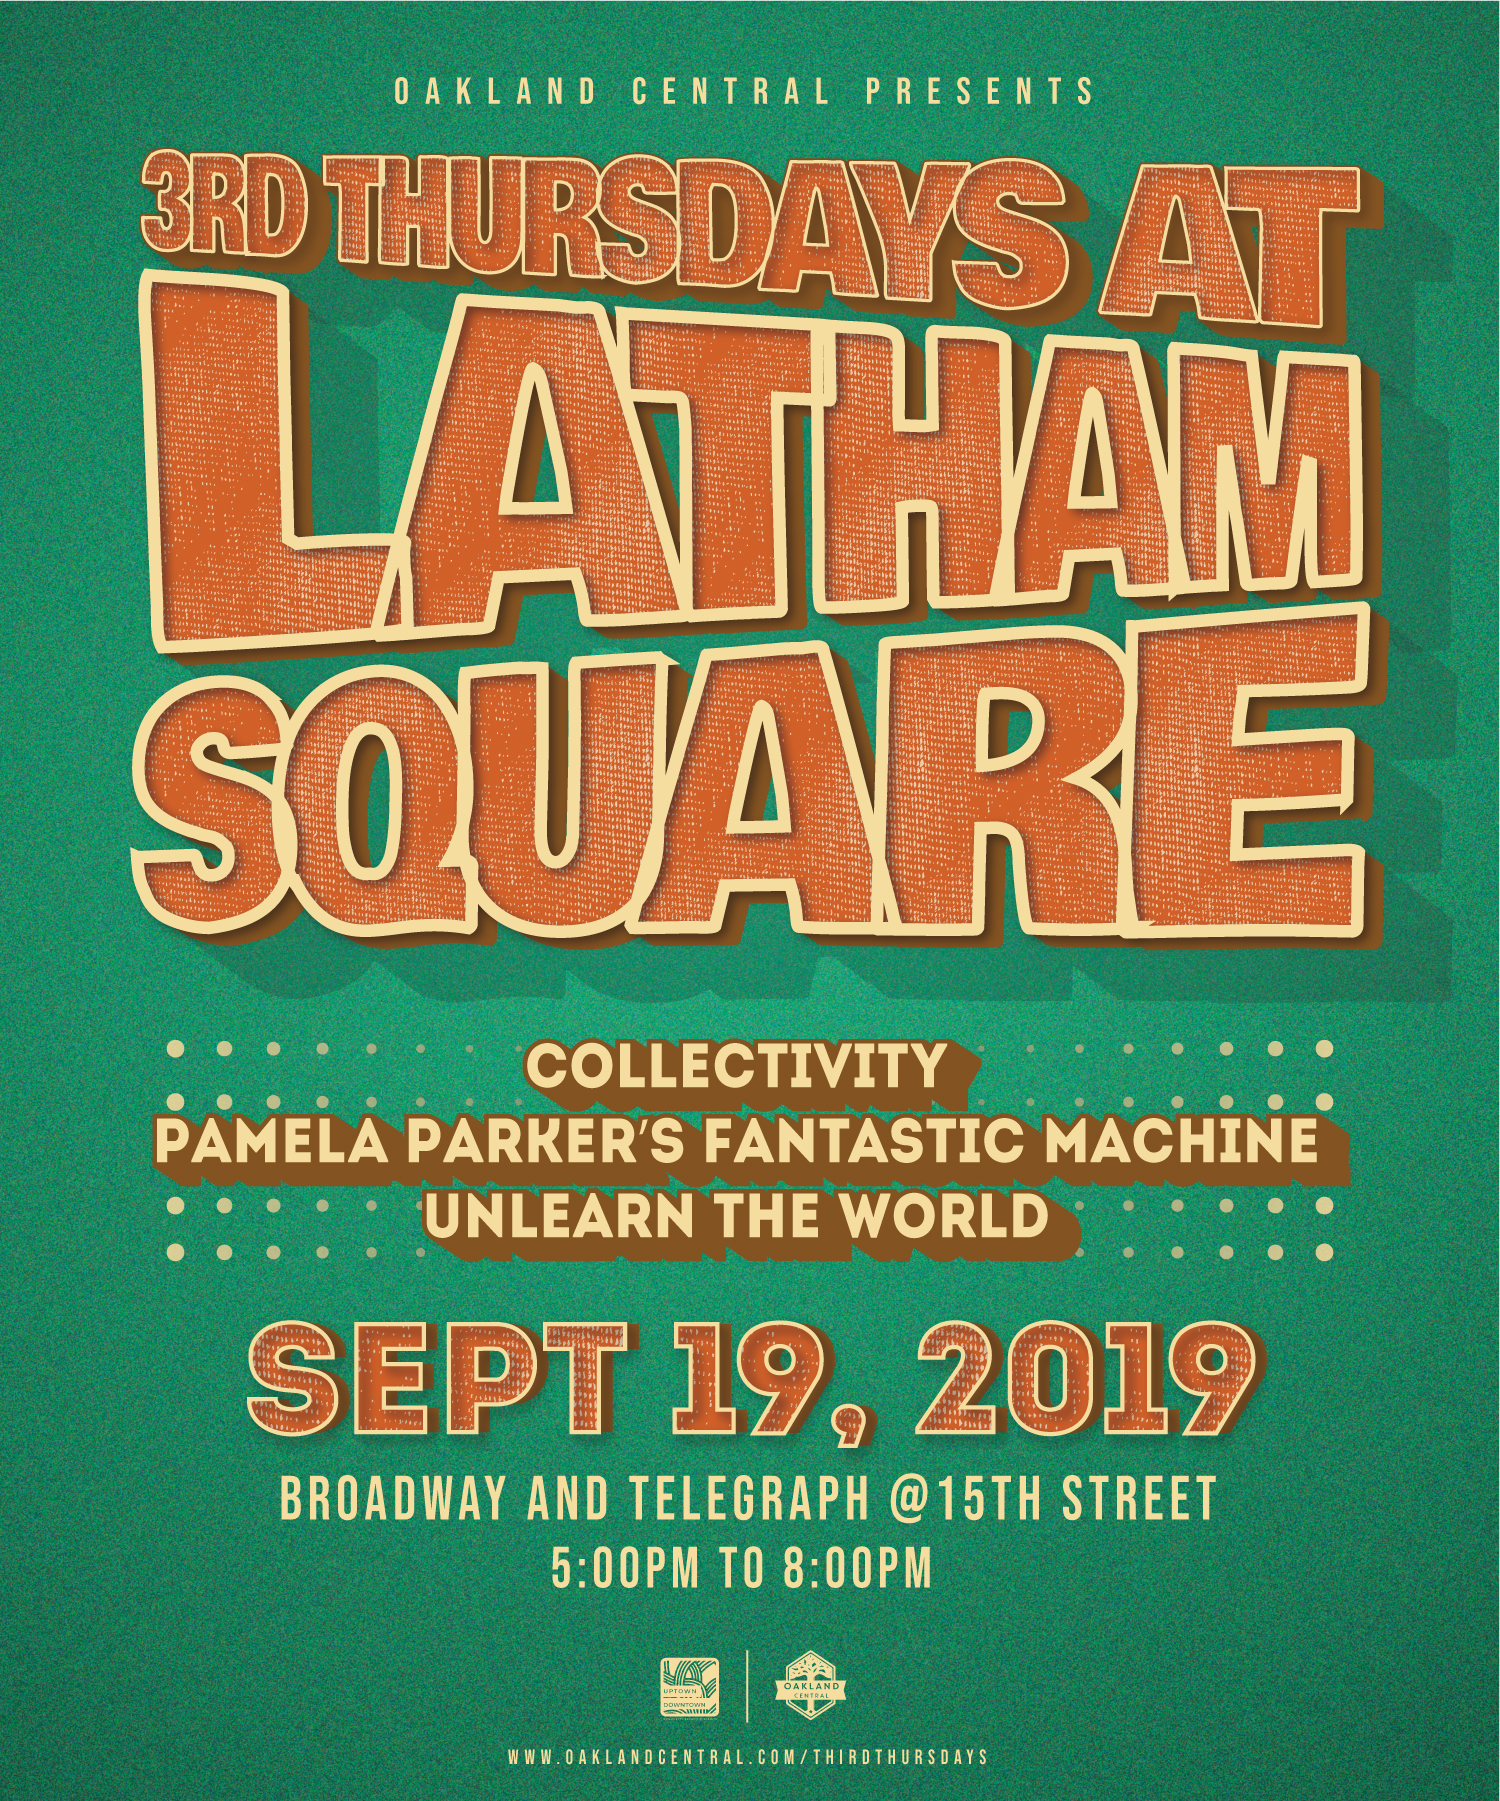 September 19, 2019 Thursday at Latham Square - Downtown Oakland Specific Plan Image